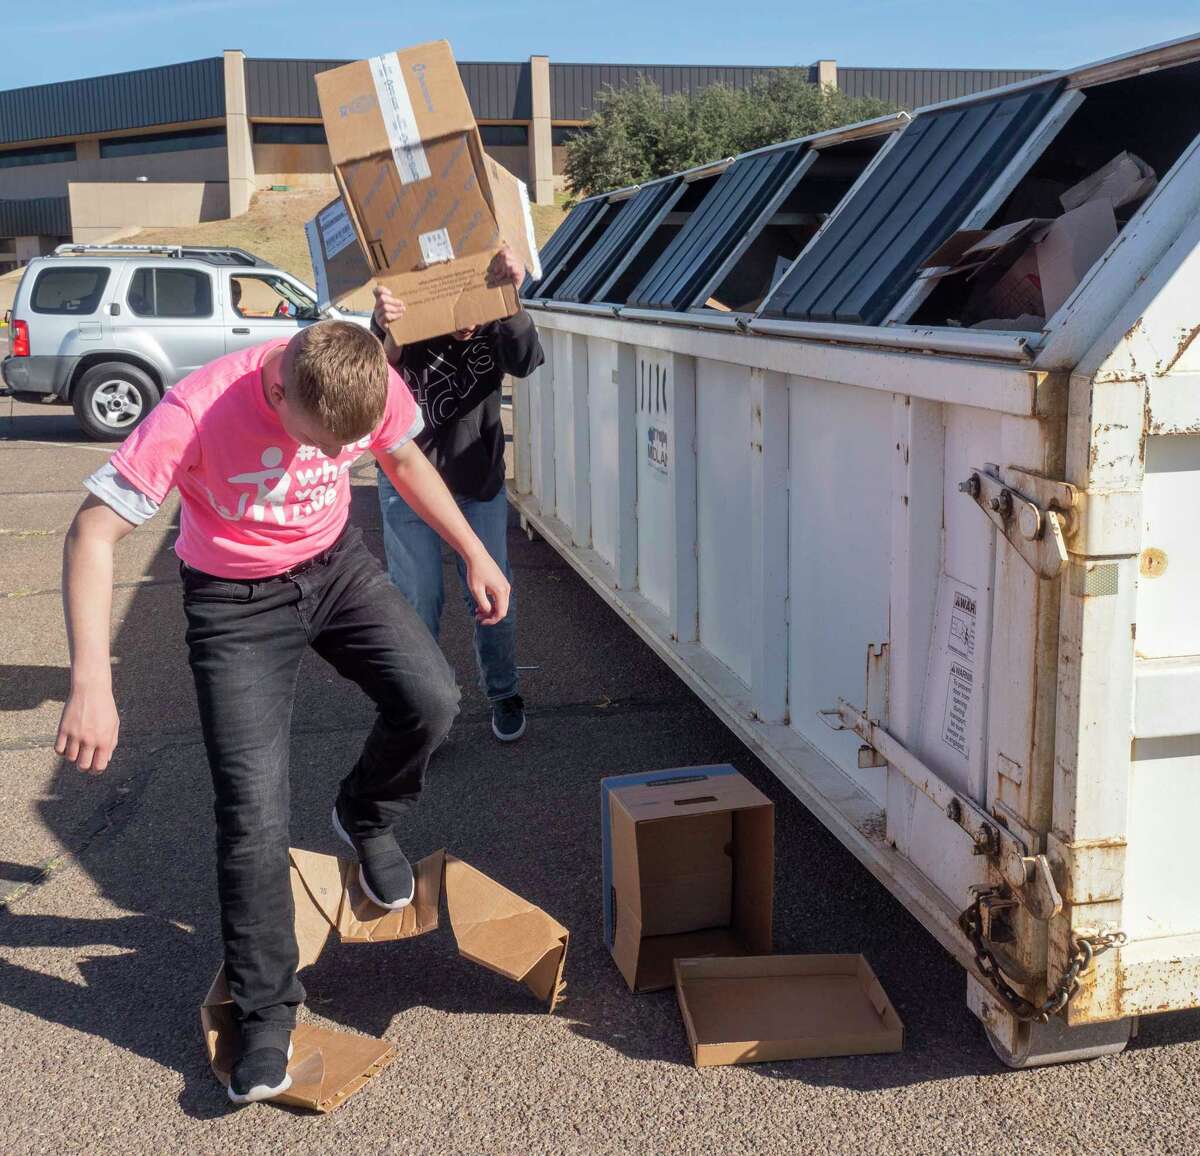 Volunteers help unload residents cars and trucks of recyclable items 11/13/2021 during the 16th annual Texas Recycles Day with Keep Midland Beautiful in the parking lot on Midland College campus. Tim Fischer/Reporter-Telegram